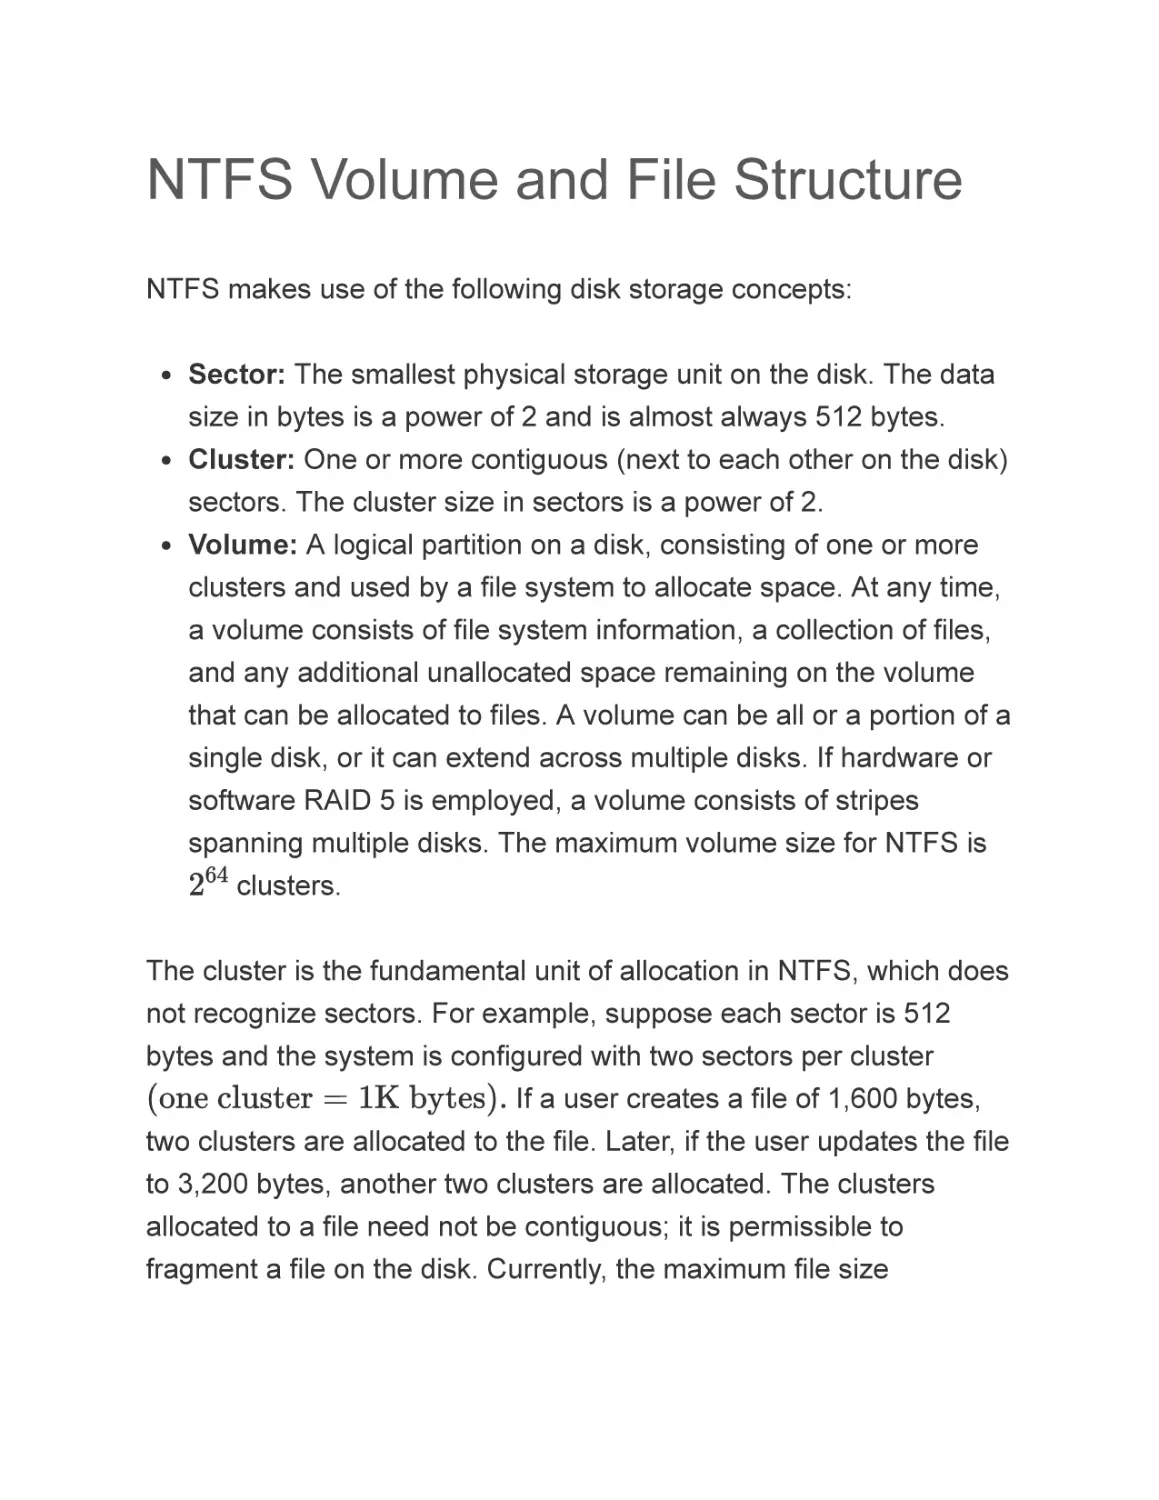 NTFS Volume and File Structure